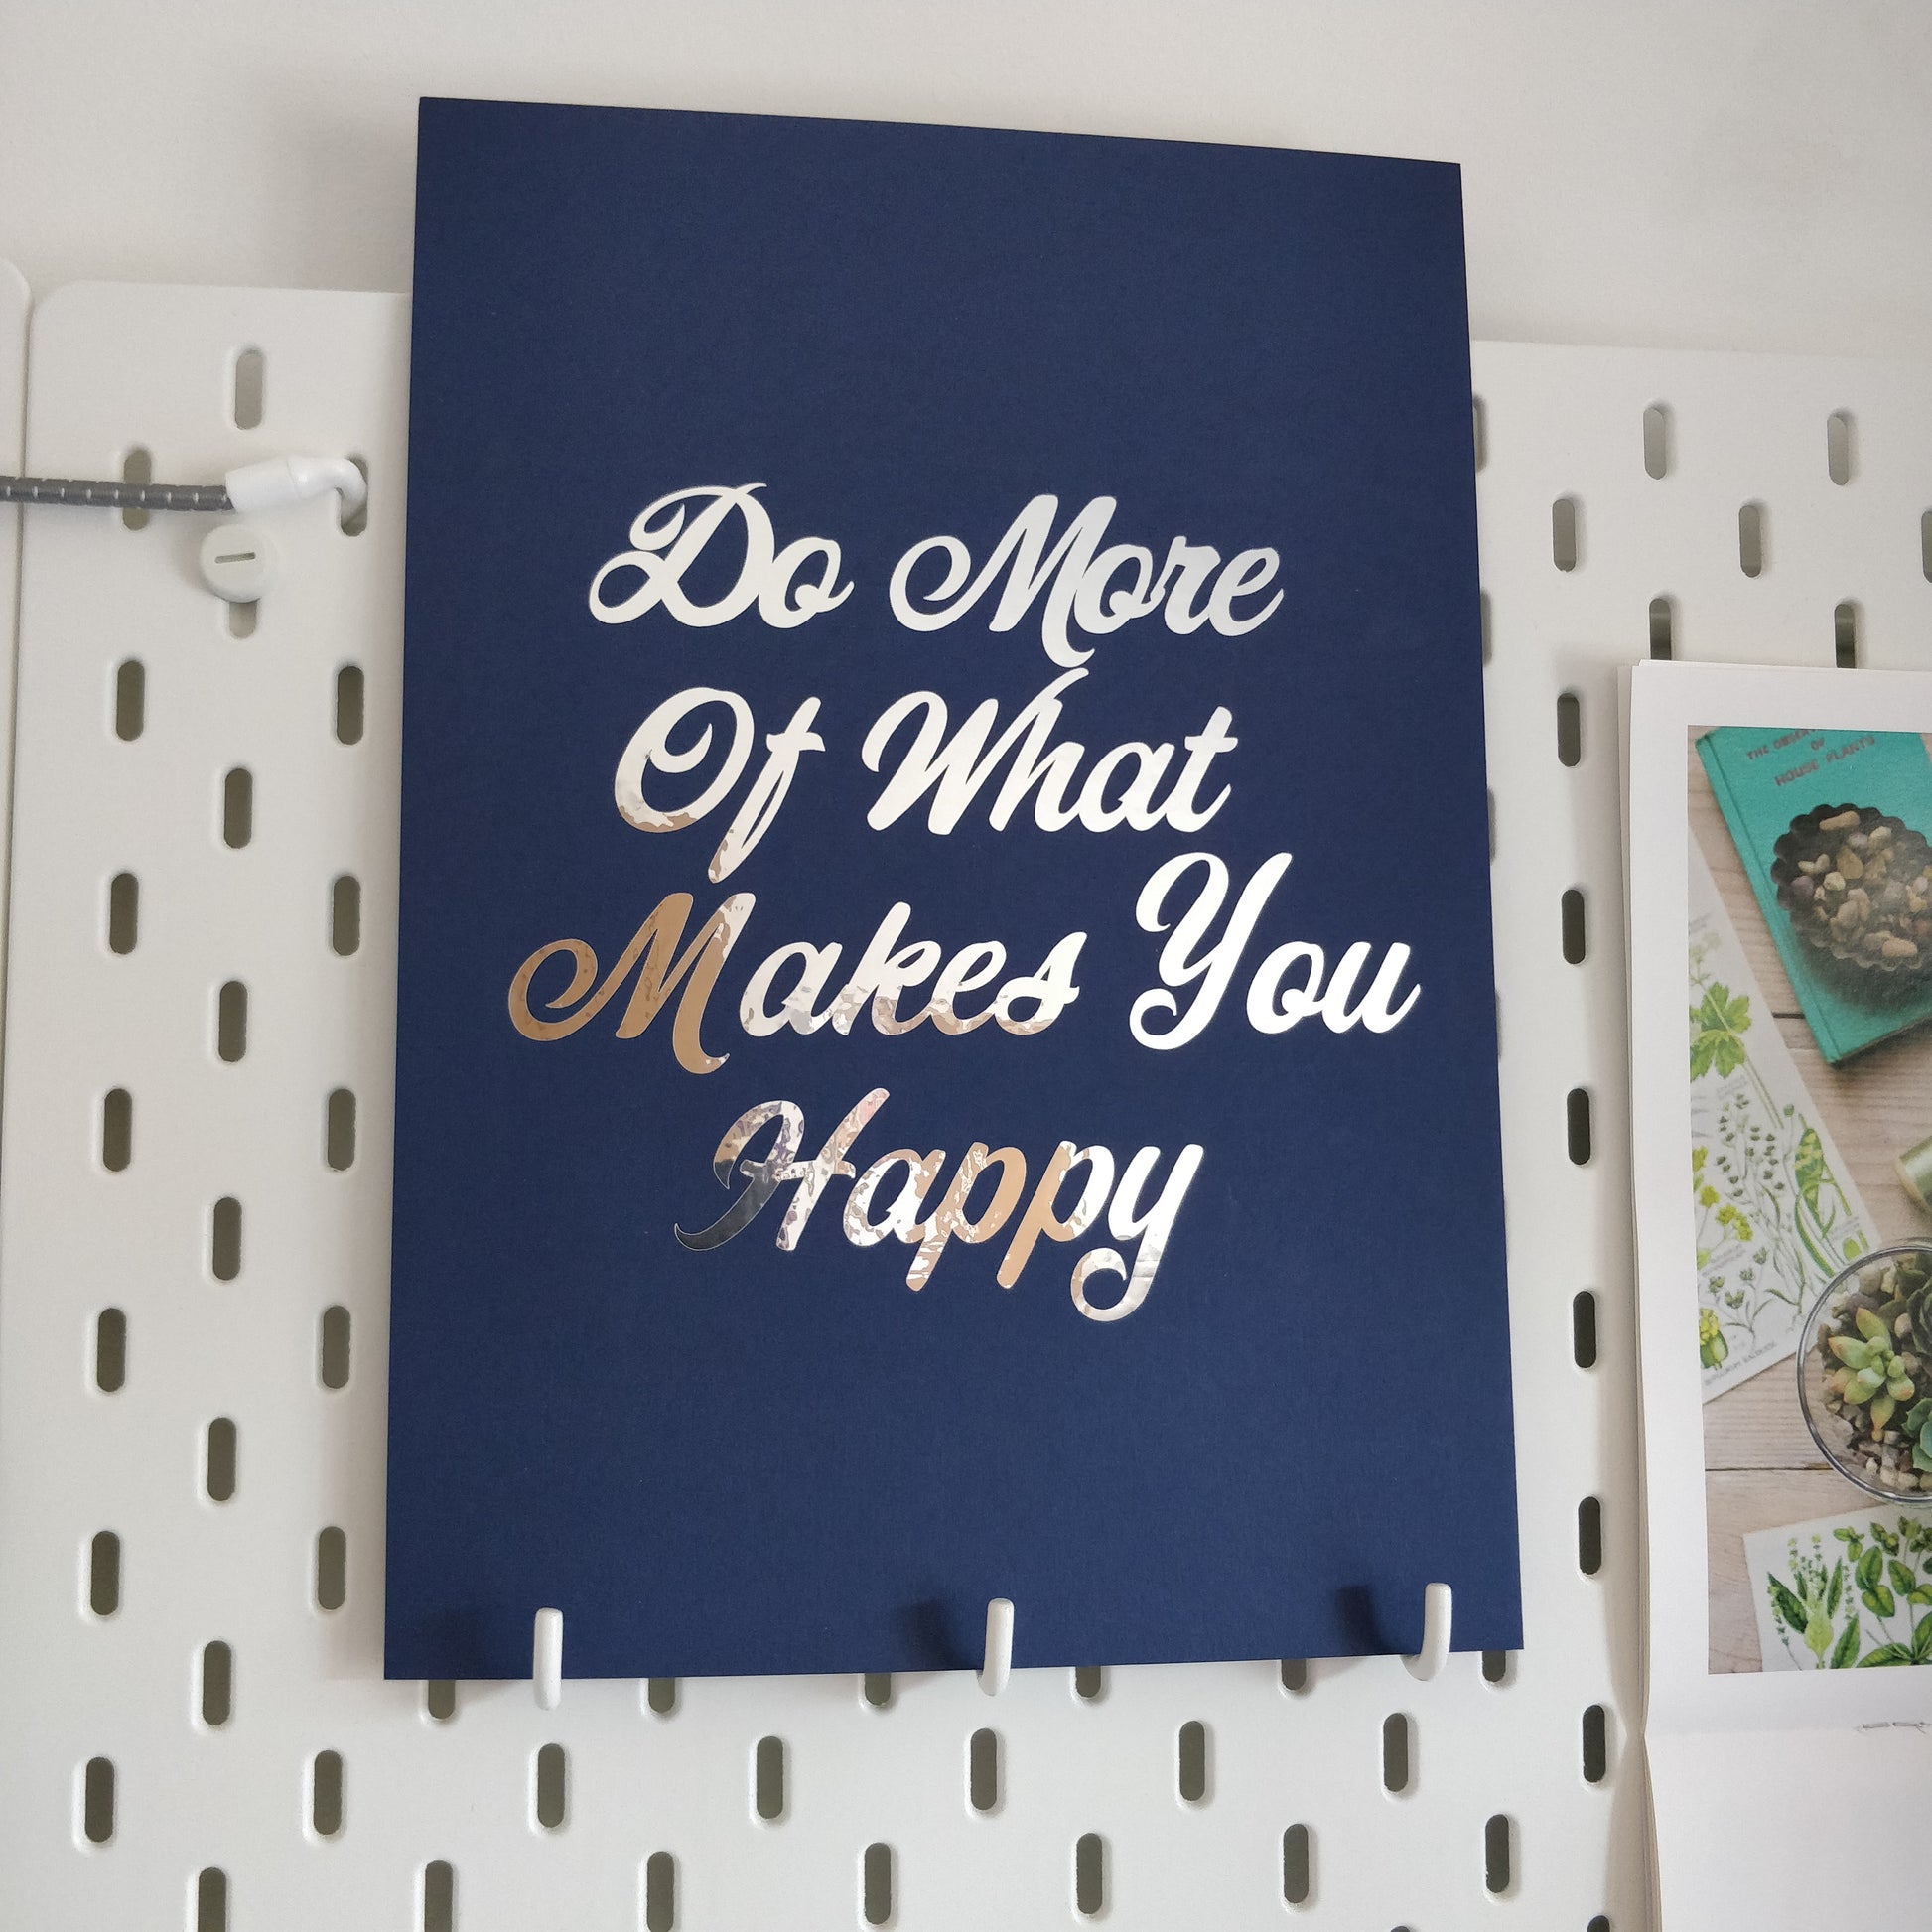 Do more of what makes you happy - A4 Mirror Print - fay-dixon-design